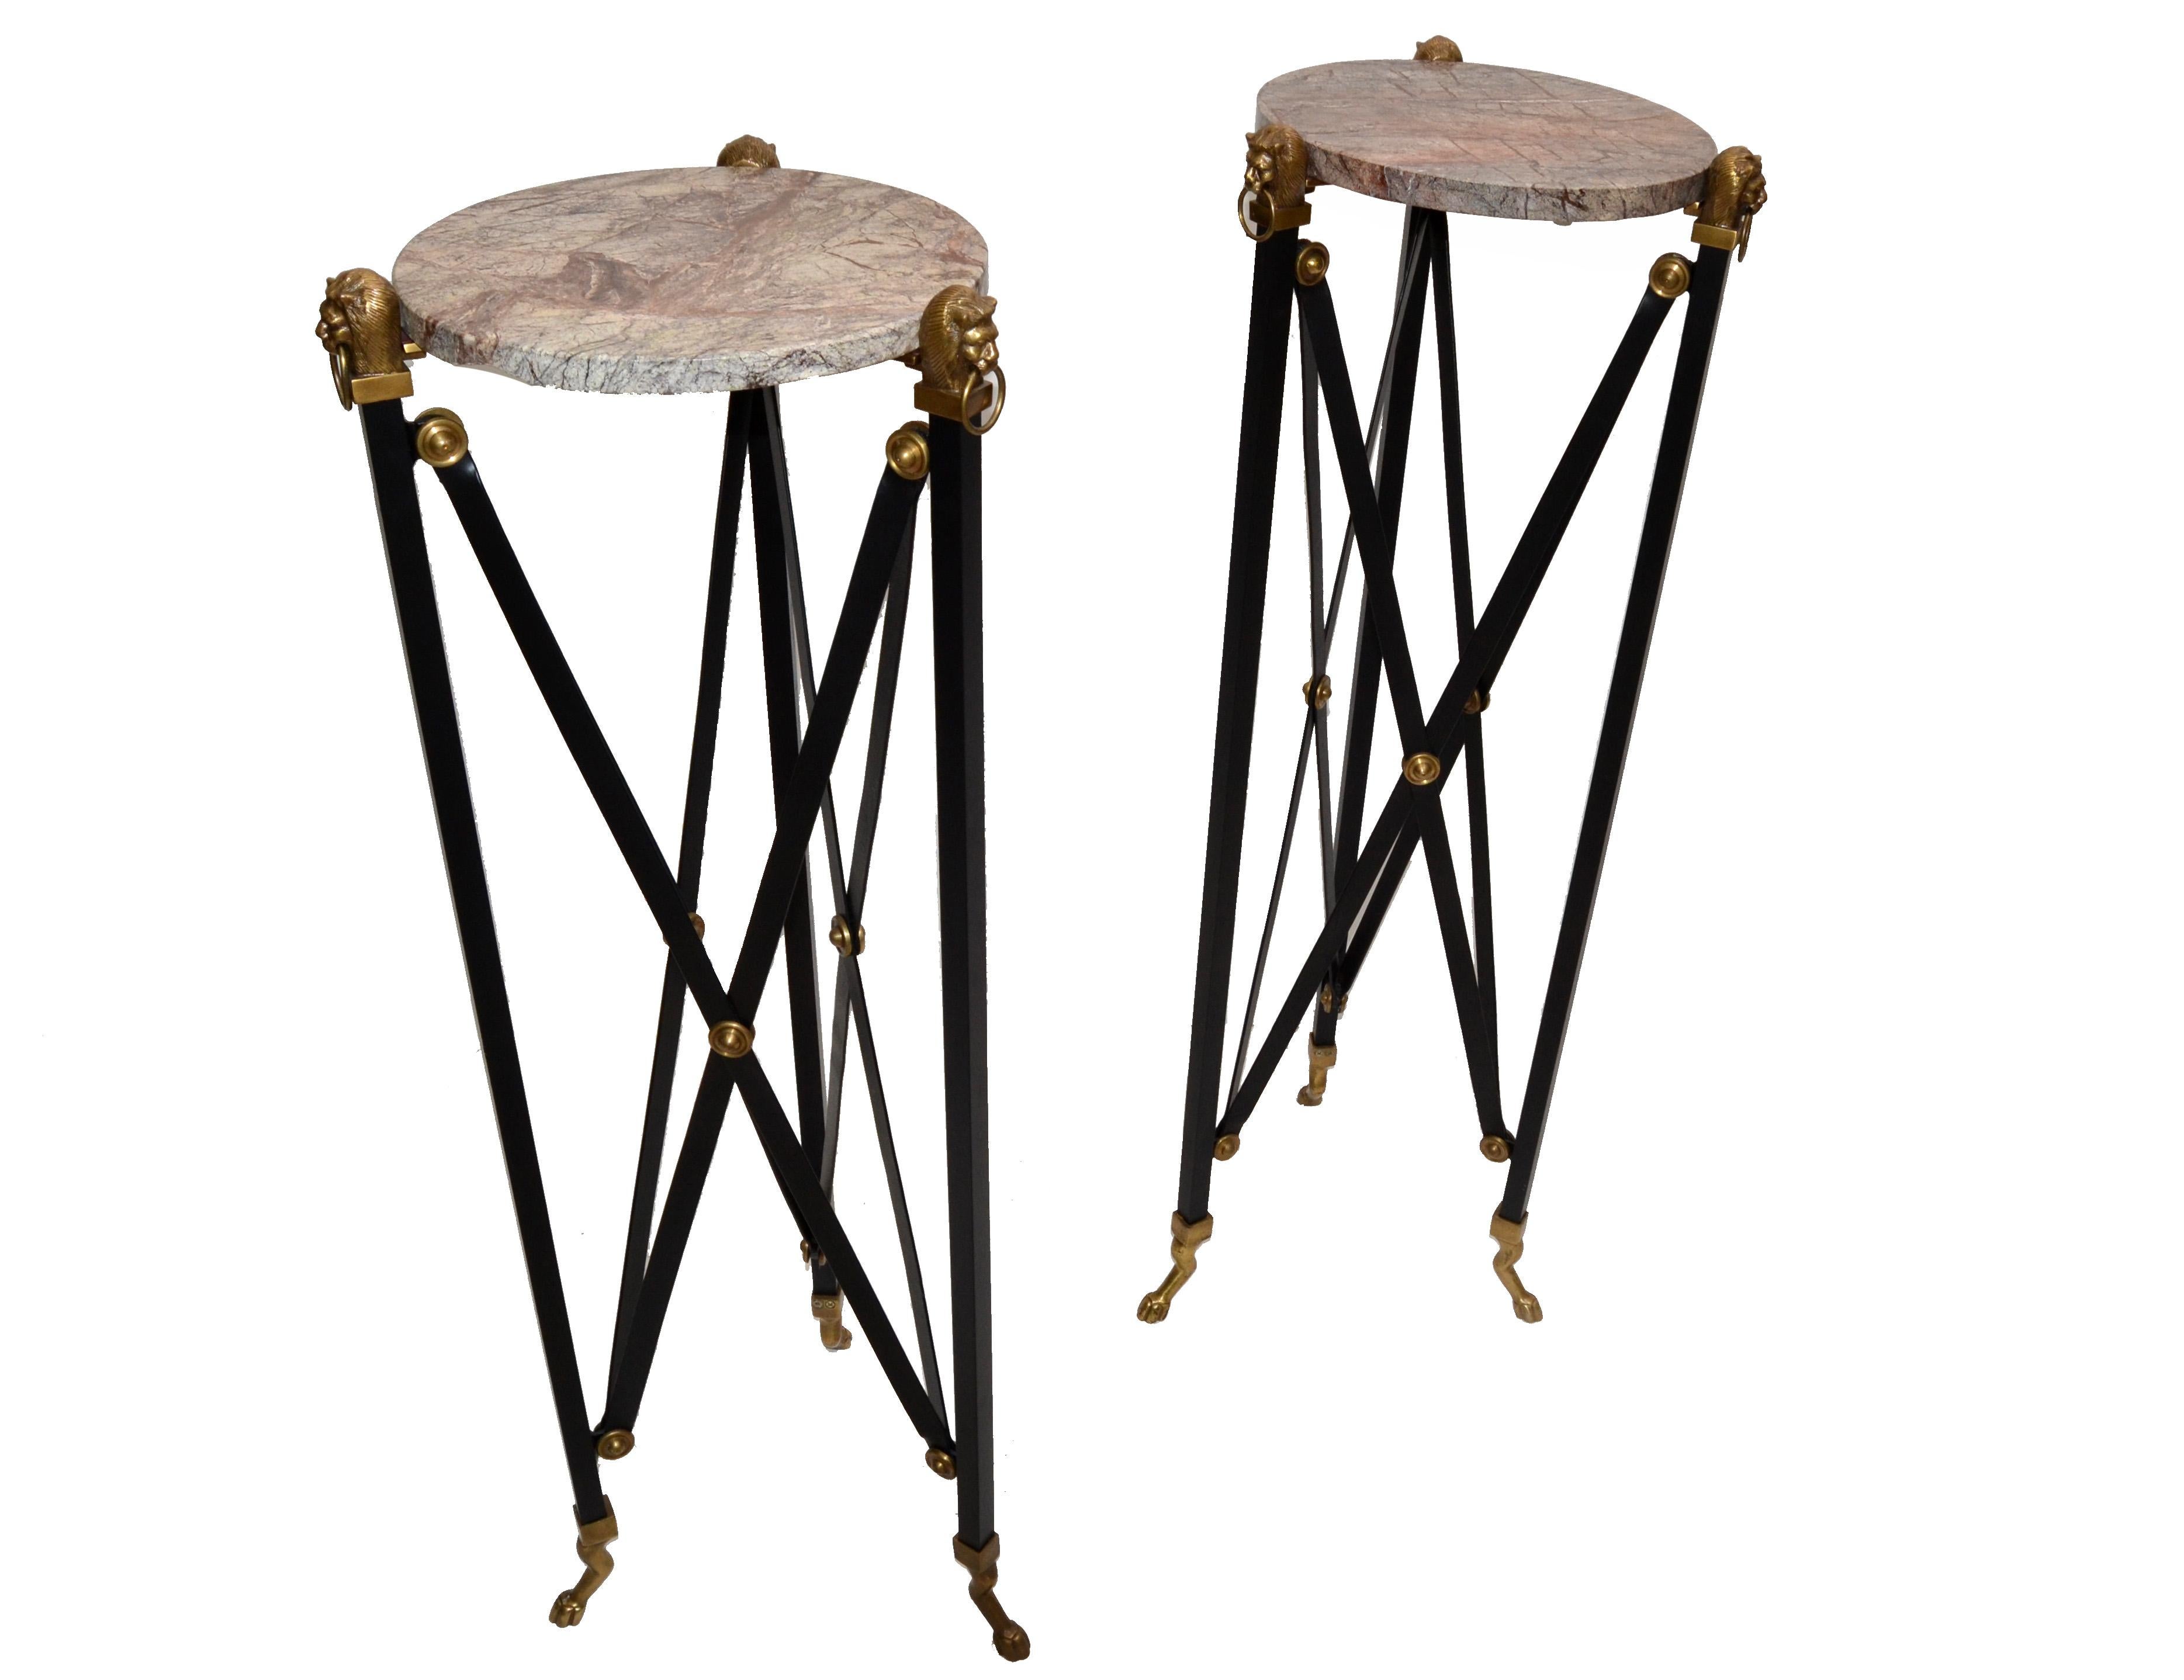 Pair of neoclassical Maison Jansen style sculpture stand / pedestal / side tables with a round stone top.
Beautifully crafted bronze lion head with detail brass ornaments and steel cross bars.
Cast bronze claw feet bases.
Round stone top